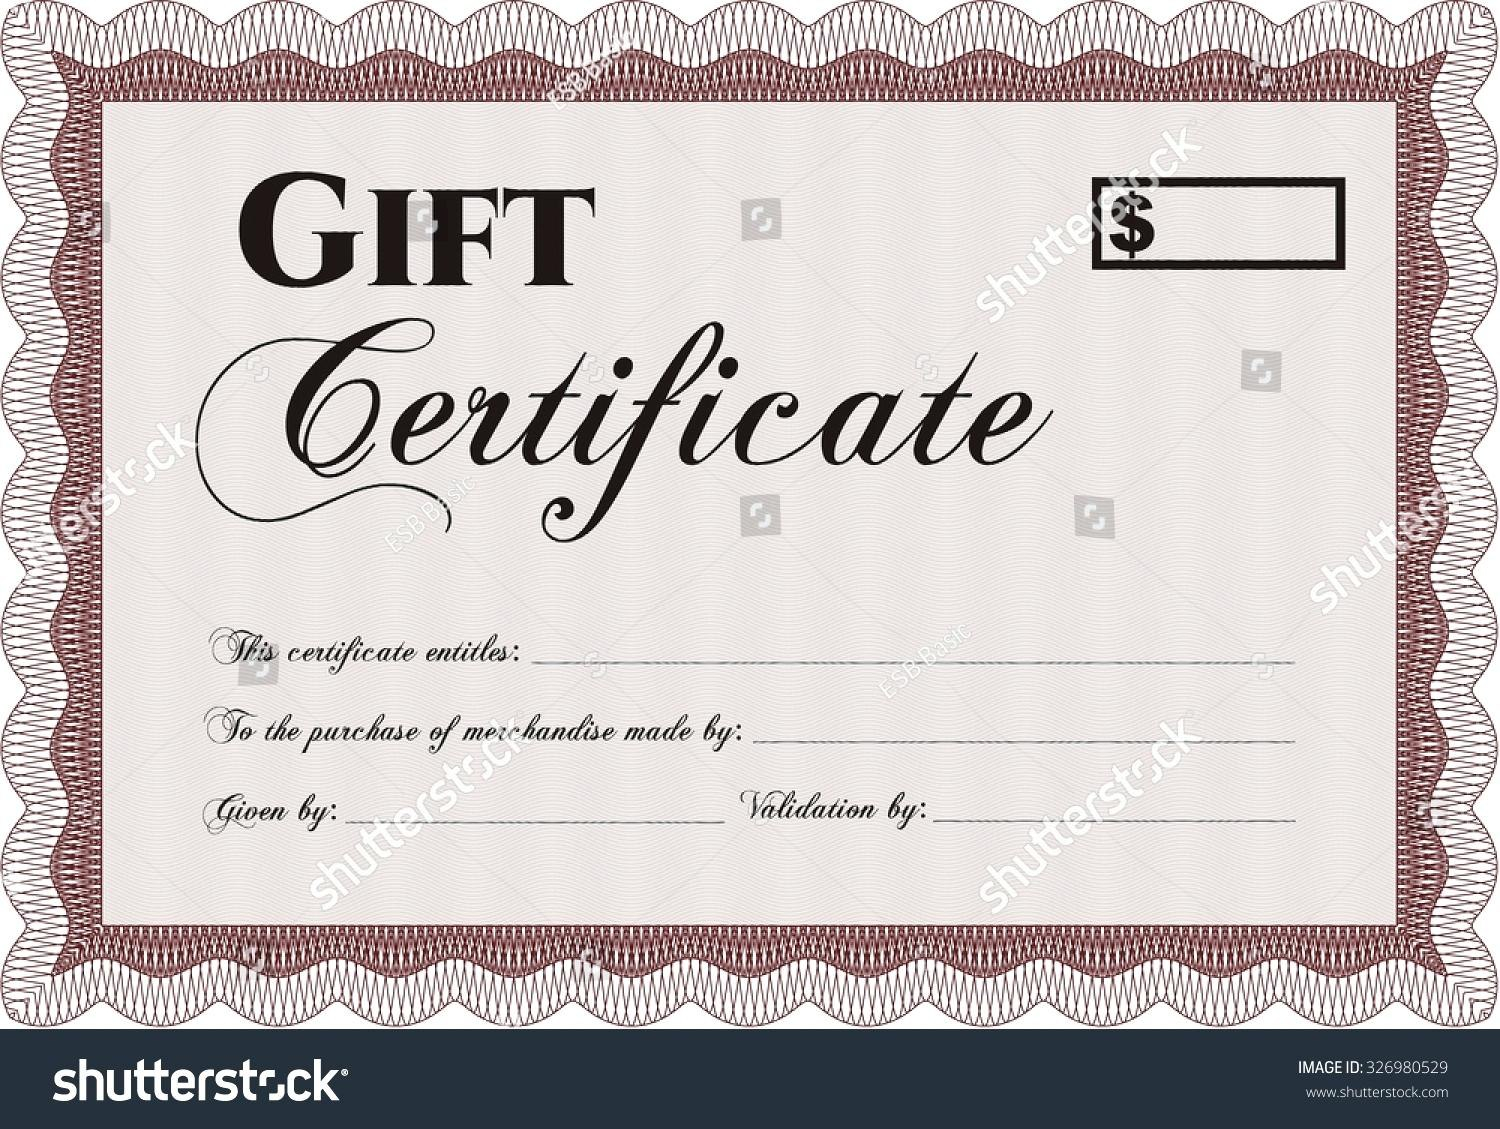 Best Ideas For This Certificate Entitles The Bearer Template Of Your throughout This Certificate Entitles The Bearer Template